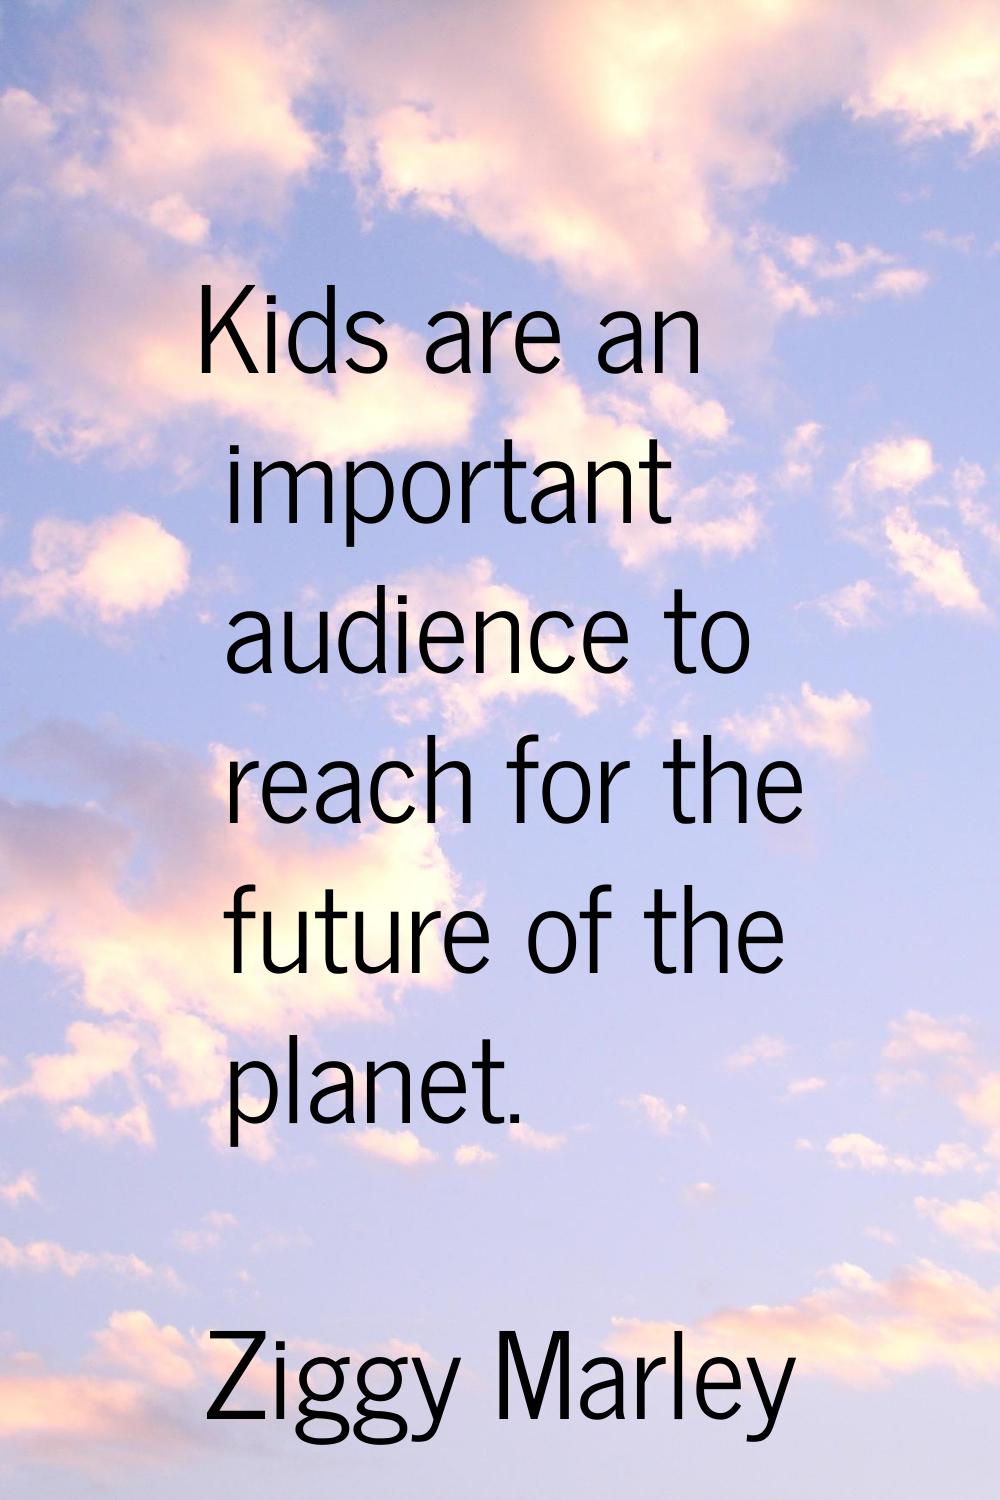 Kids are an important audience to reach for the future of the planet.